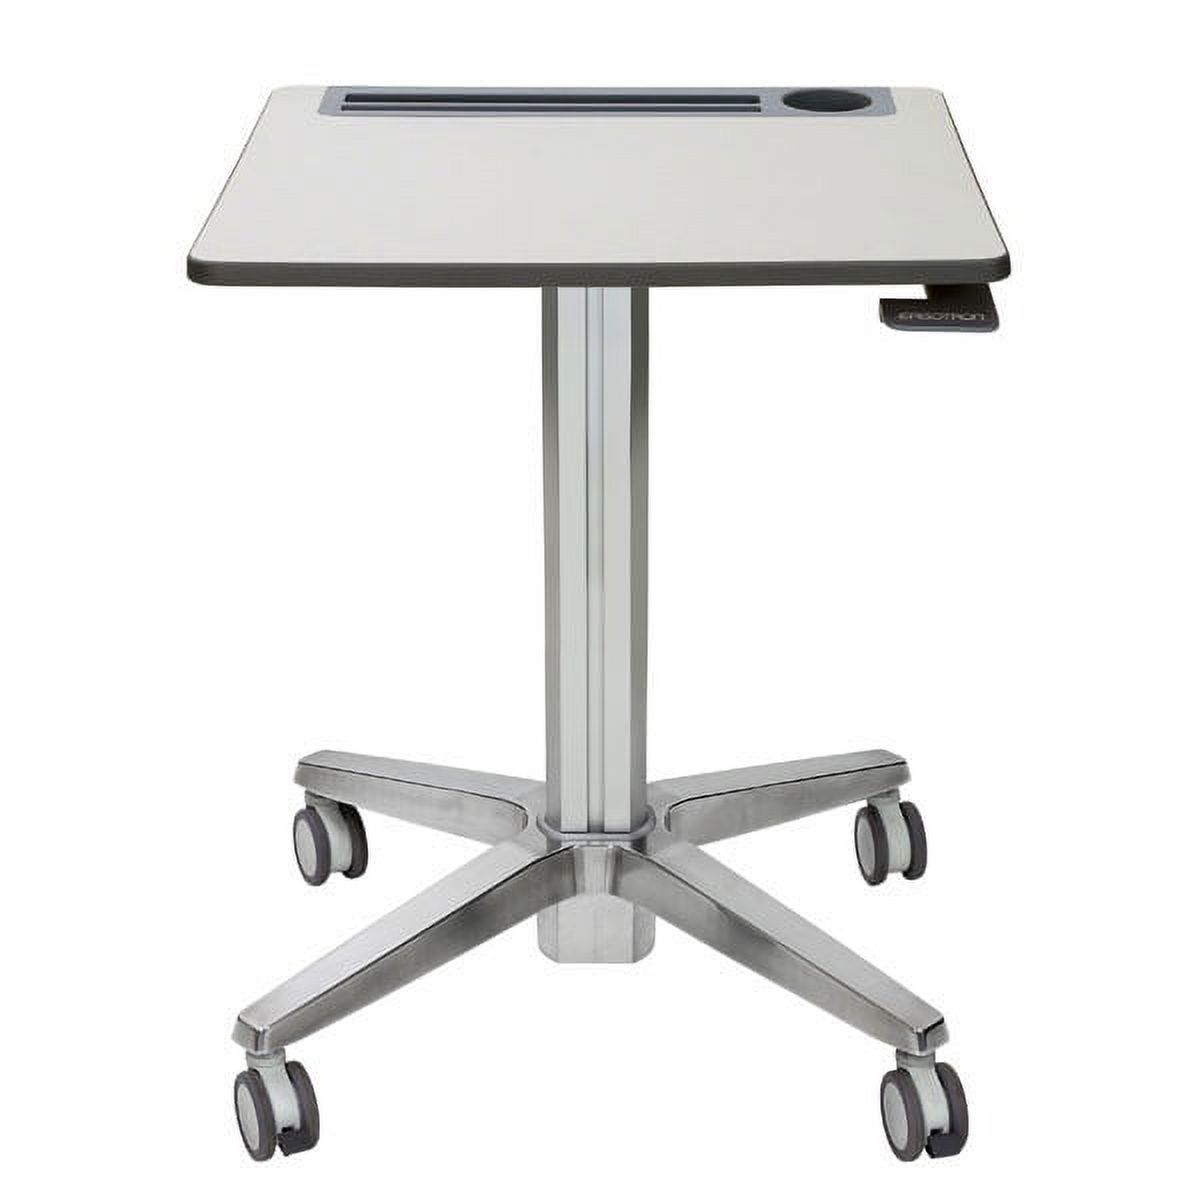 Ergotron 24-547-003 LEARNFIT SIT-STAND DESK.OPTIMIZED TO PROVIDE SIT-STAND ADJUSTMENT FOR S - image 1 of 1